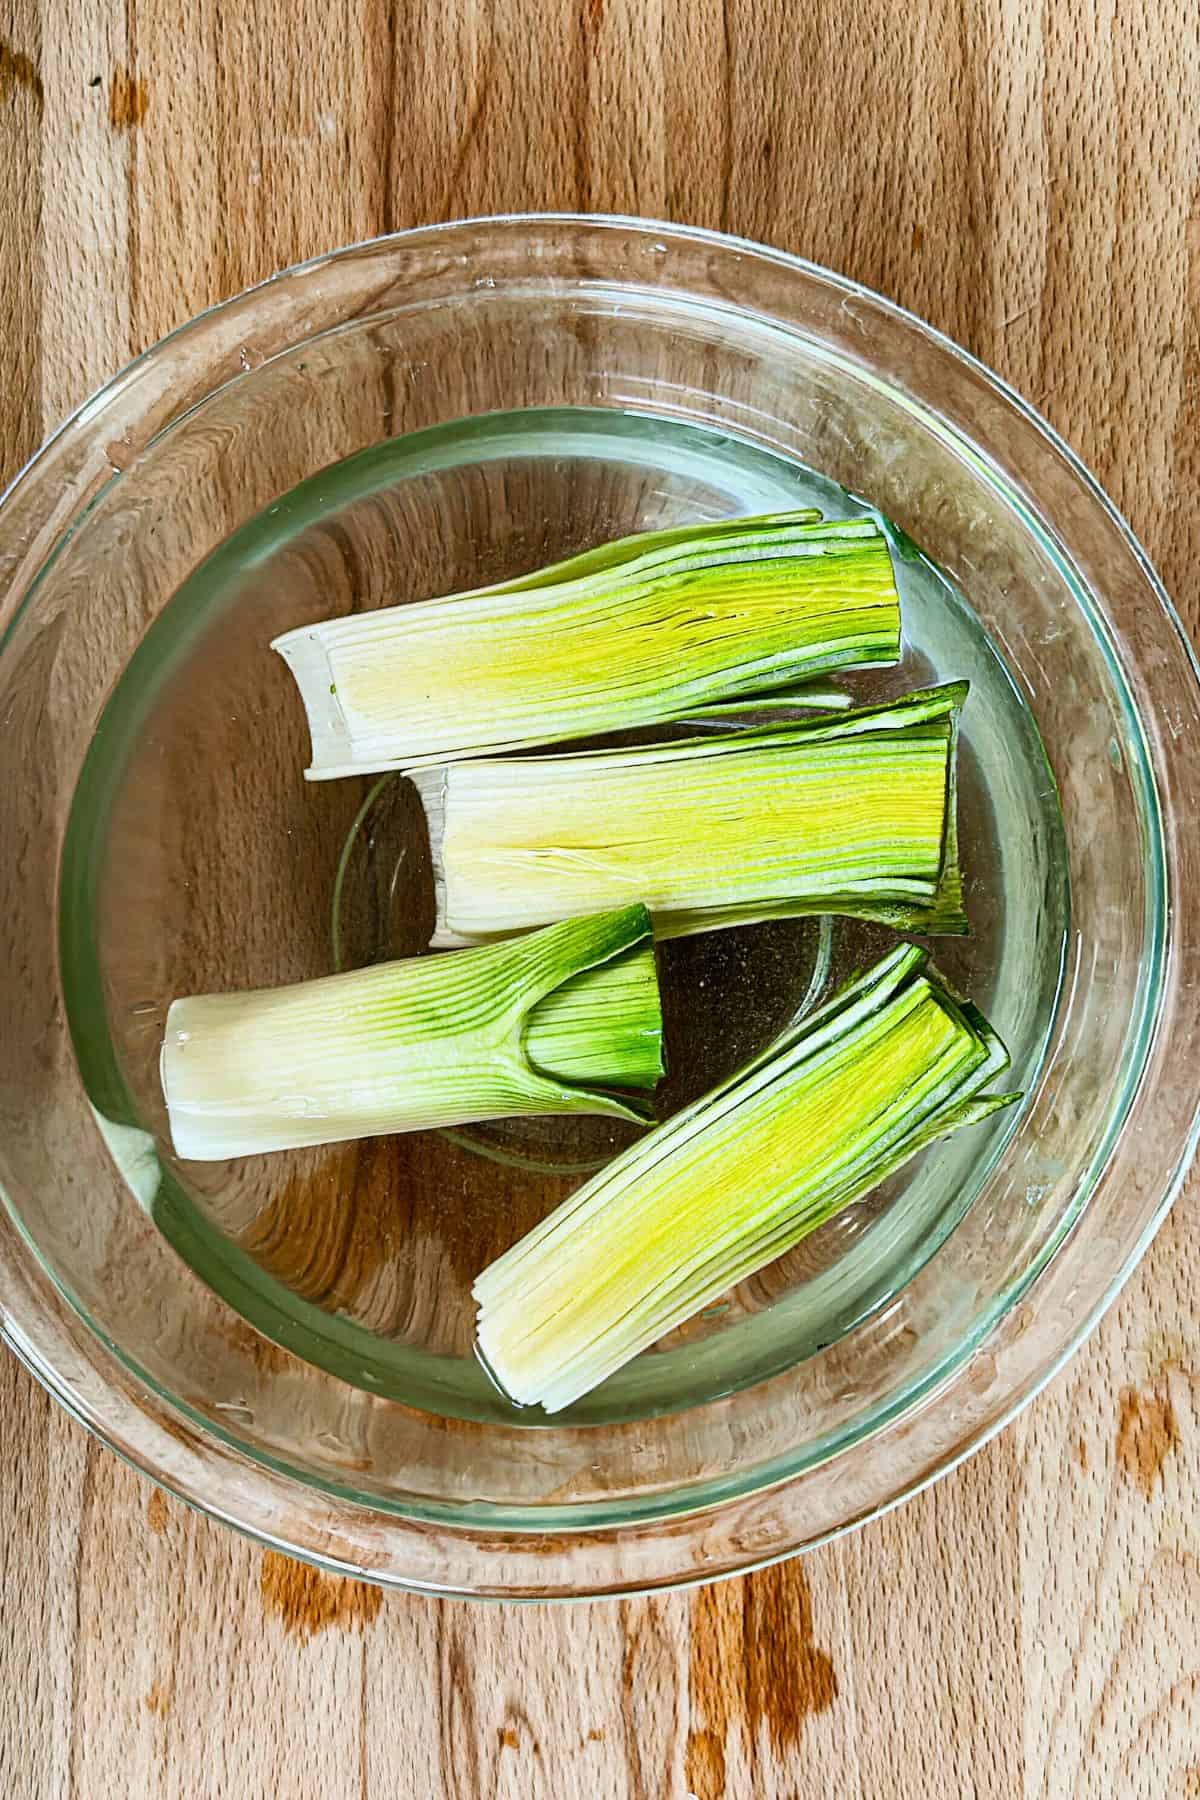 washing leeks in a bowl of water top view